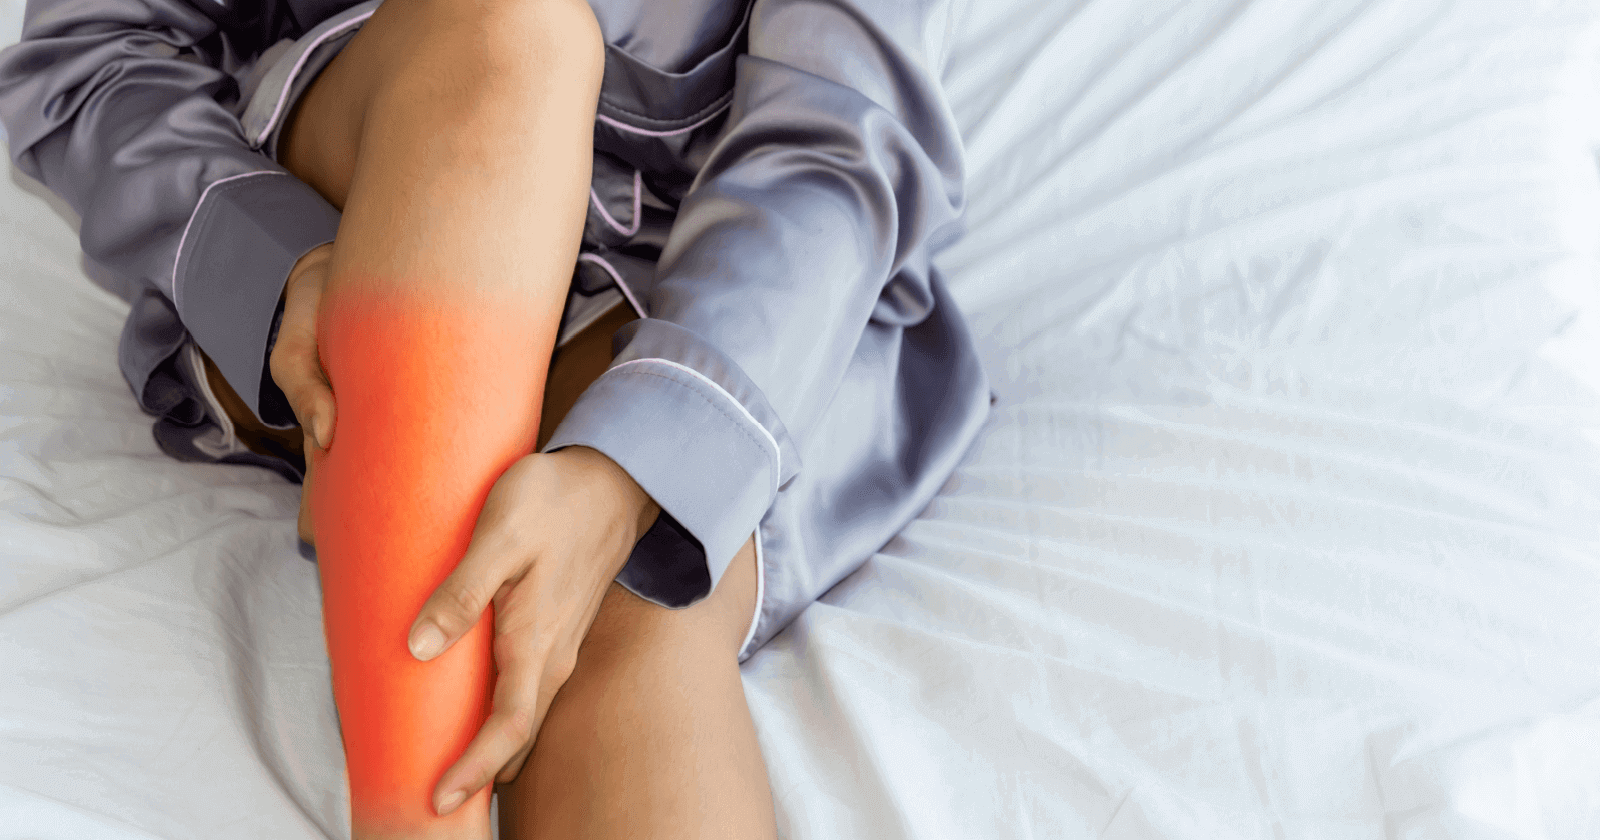 Overview of Night Leg Cramps: Meaning, symptoms, causes & treatment